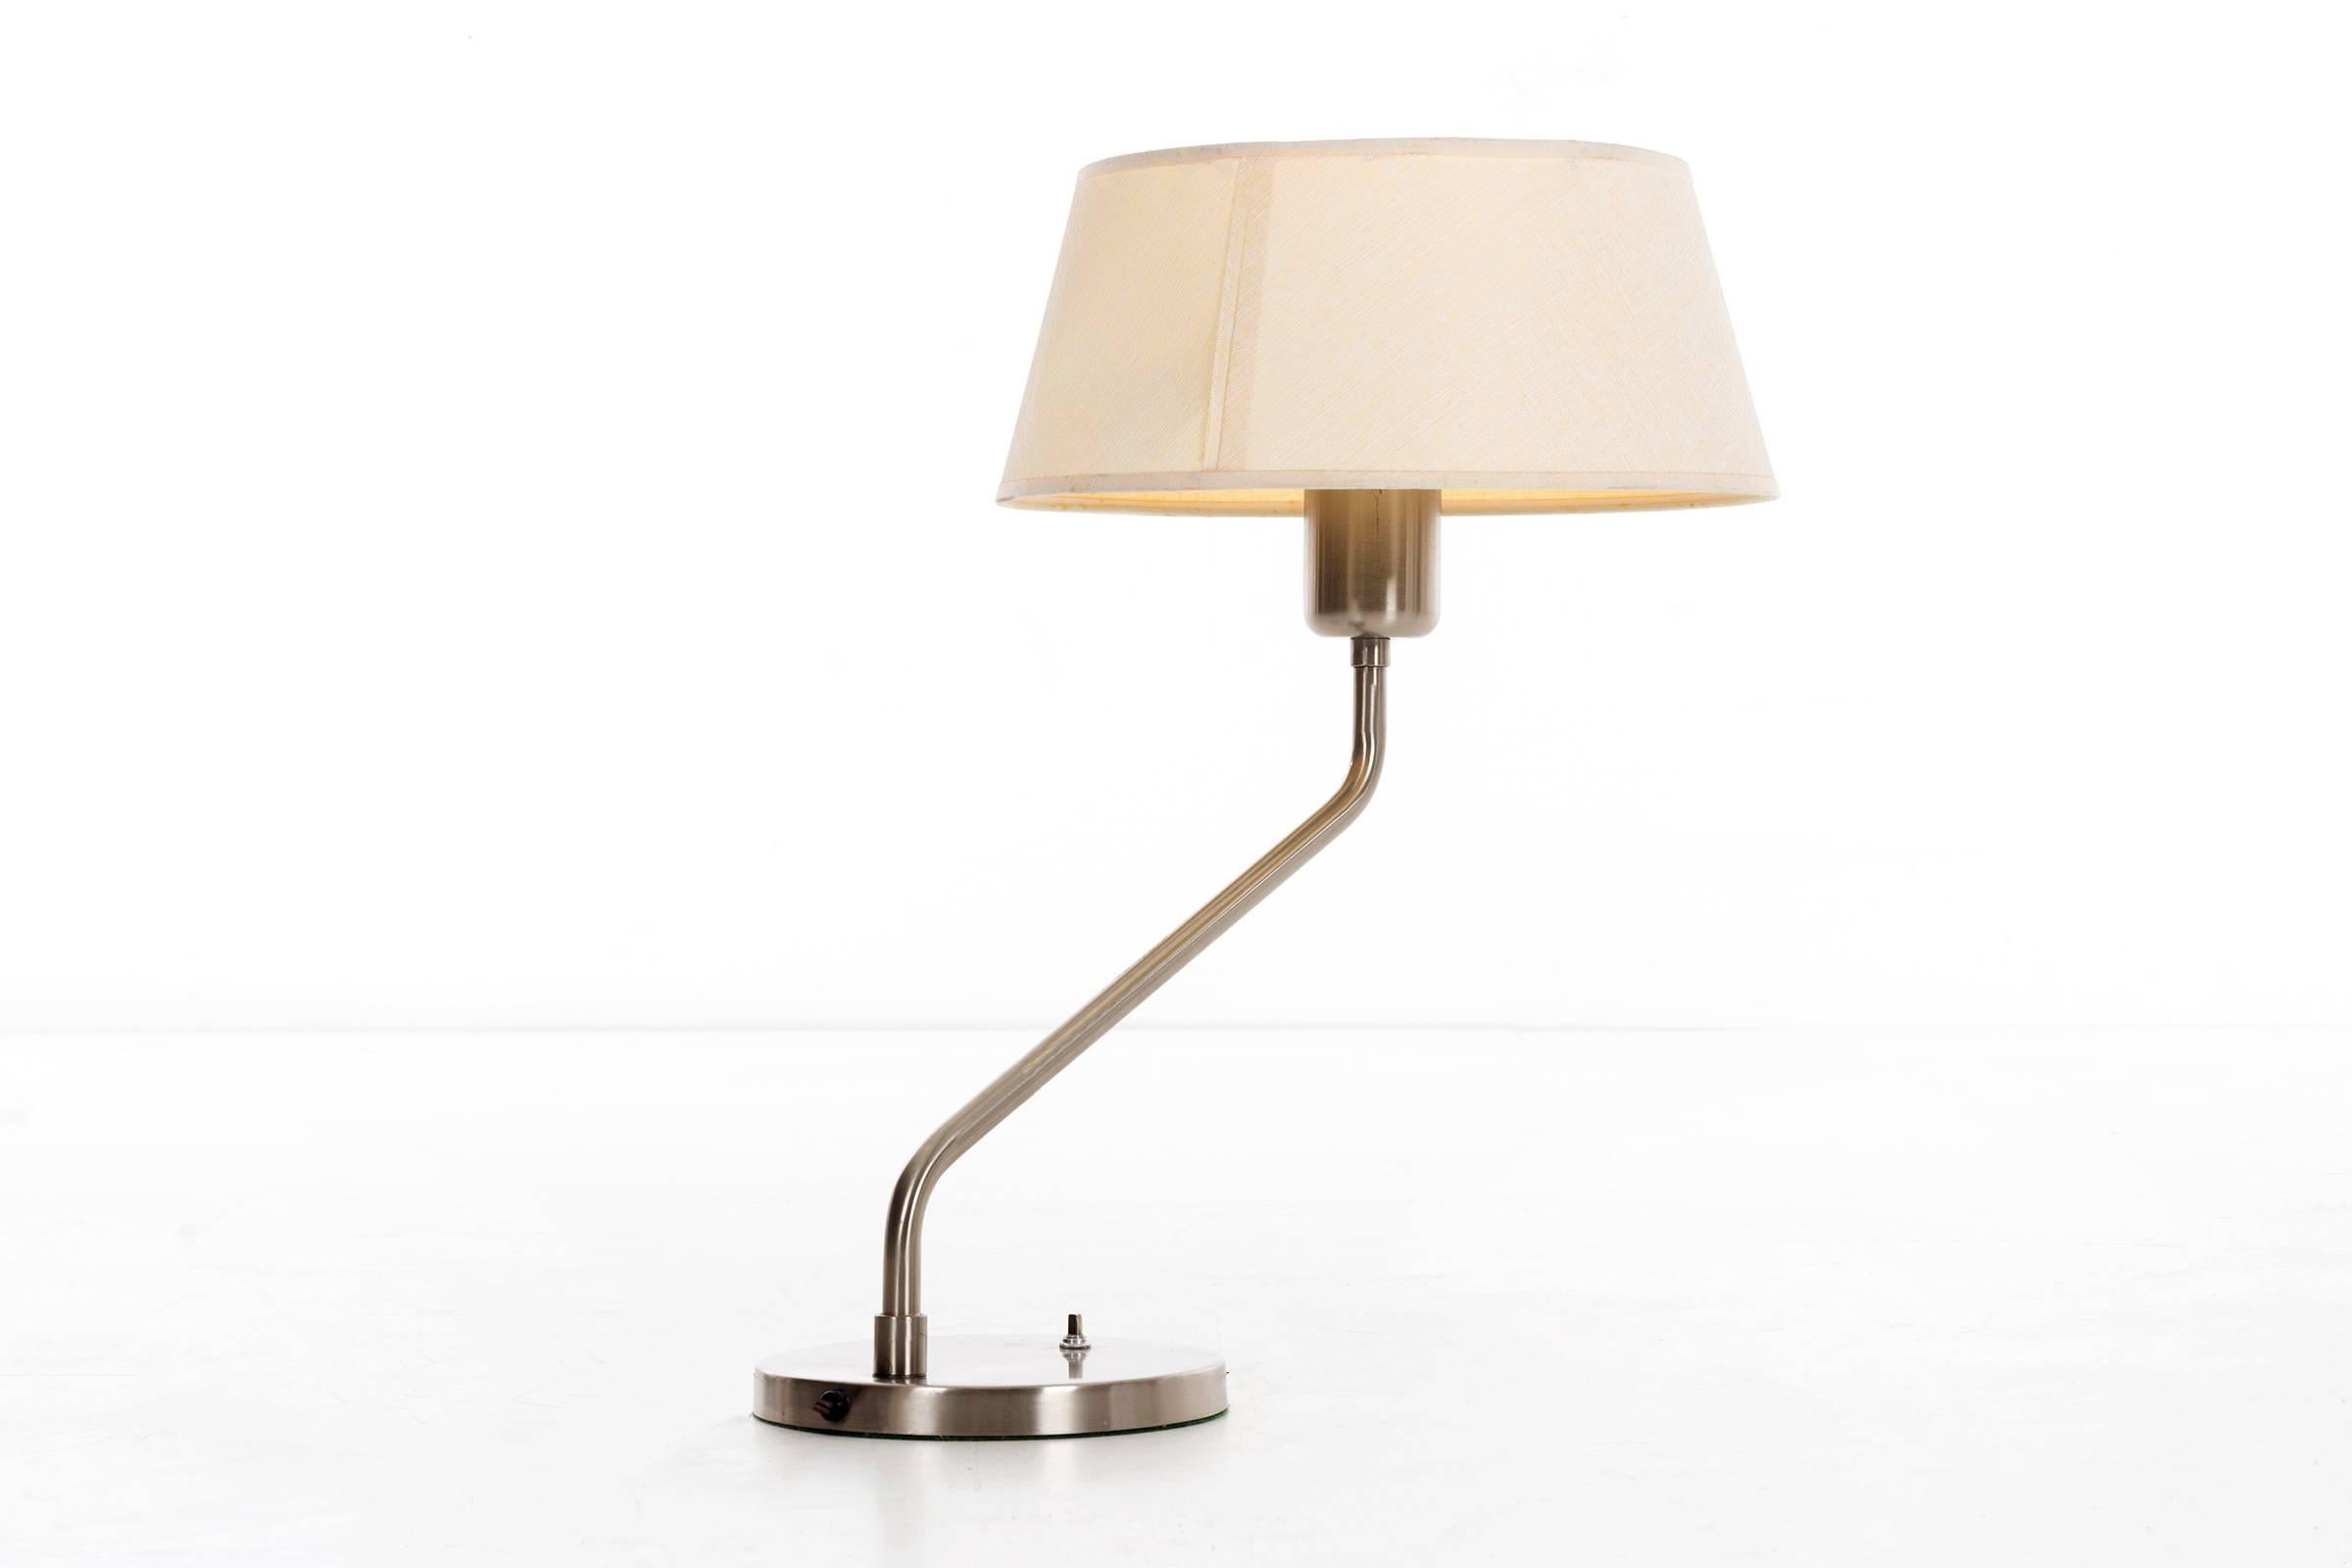 Walter Von Nessen swing arm table lamp with linen shade.